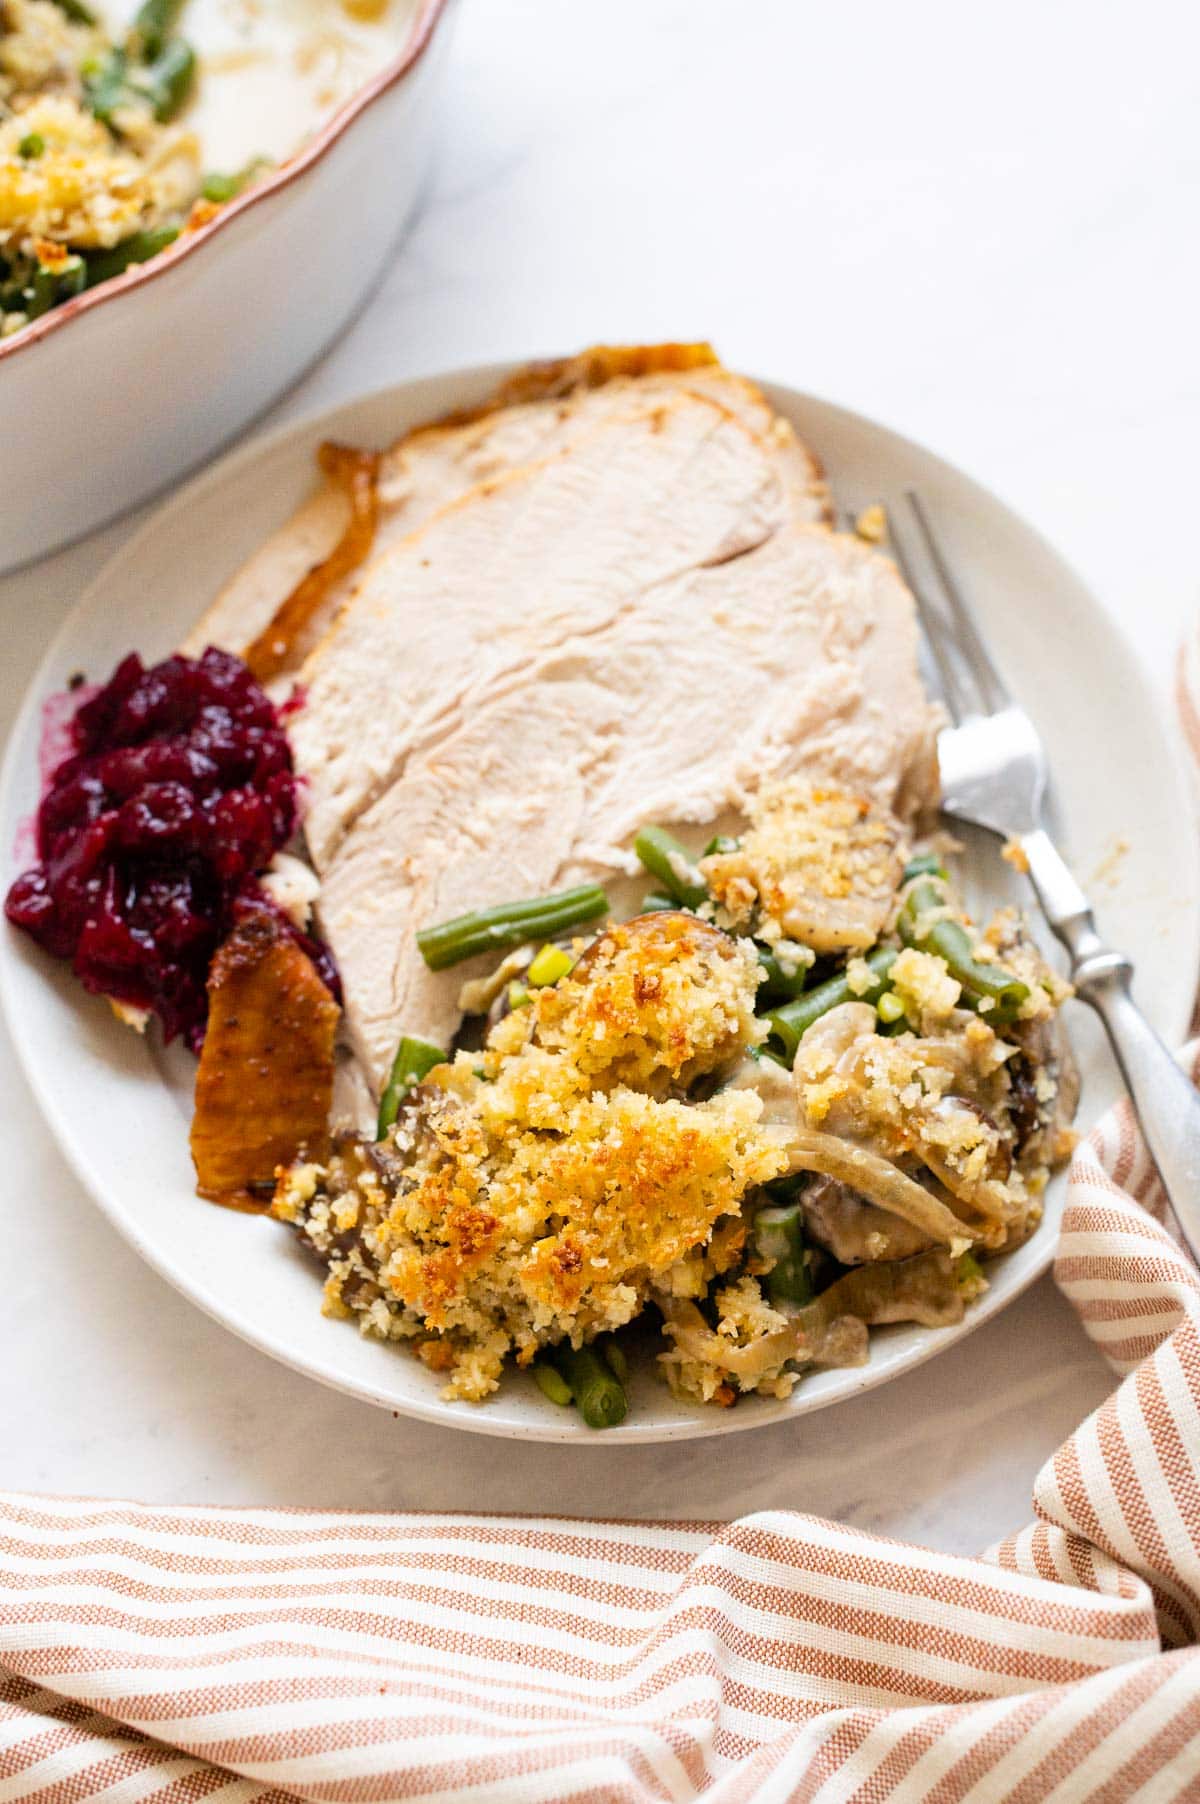 A plate with sliced turkey breast, green bean casserole and cranberry sauce.